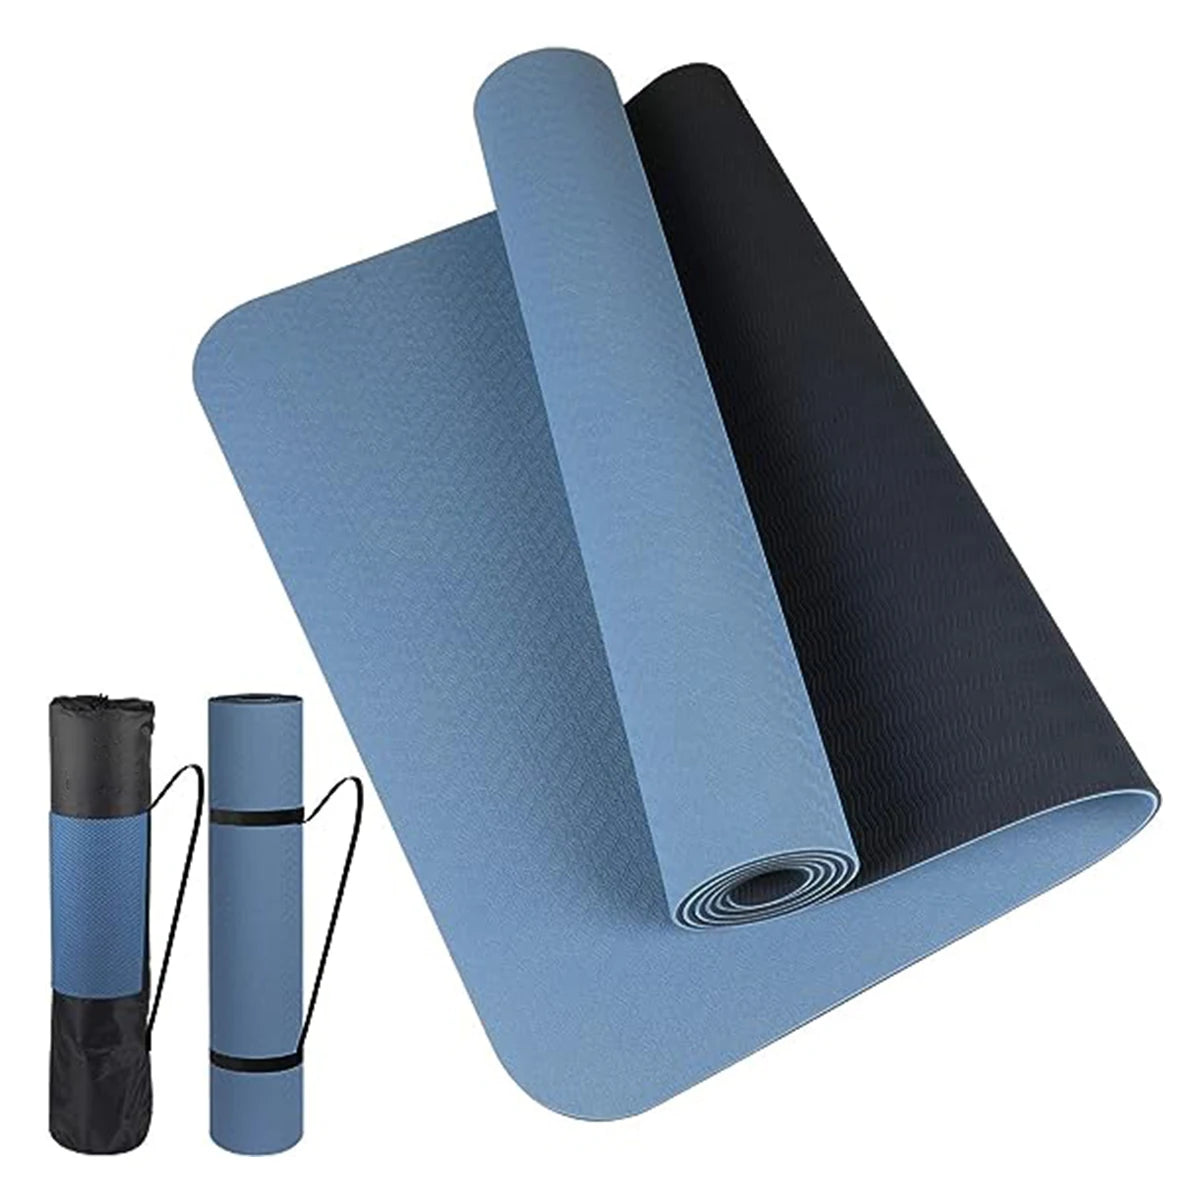 Premium 180x57cm Two-Tone TPE Yoga Mat: Ideal for Home Fitness Workouts - Non-Slip & Odorless Yoga Shop 2018